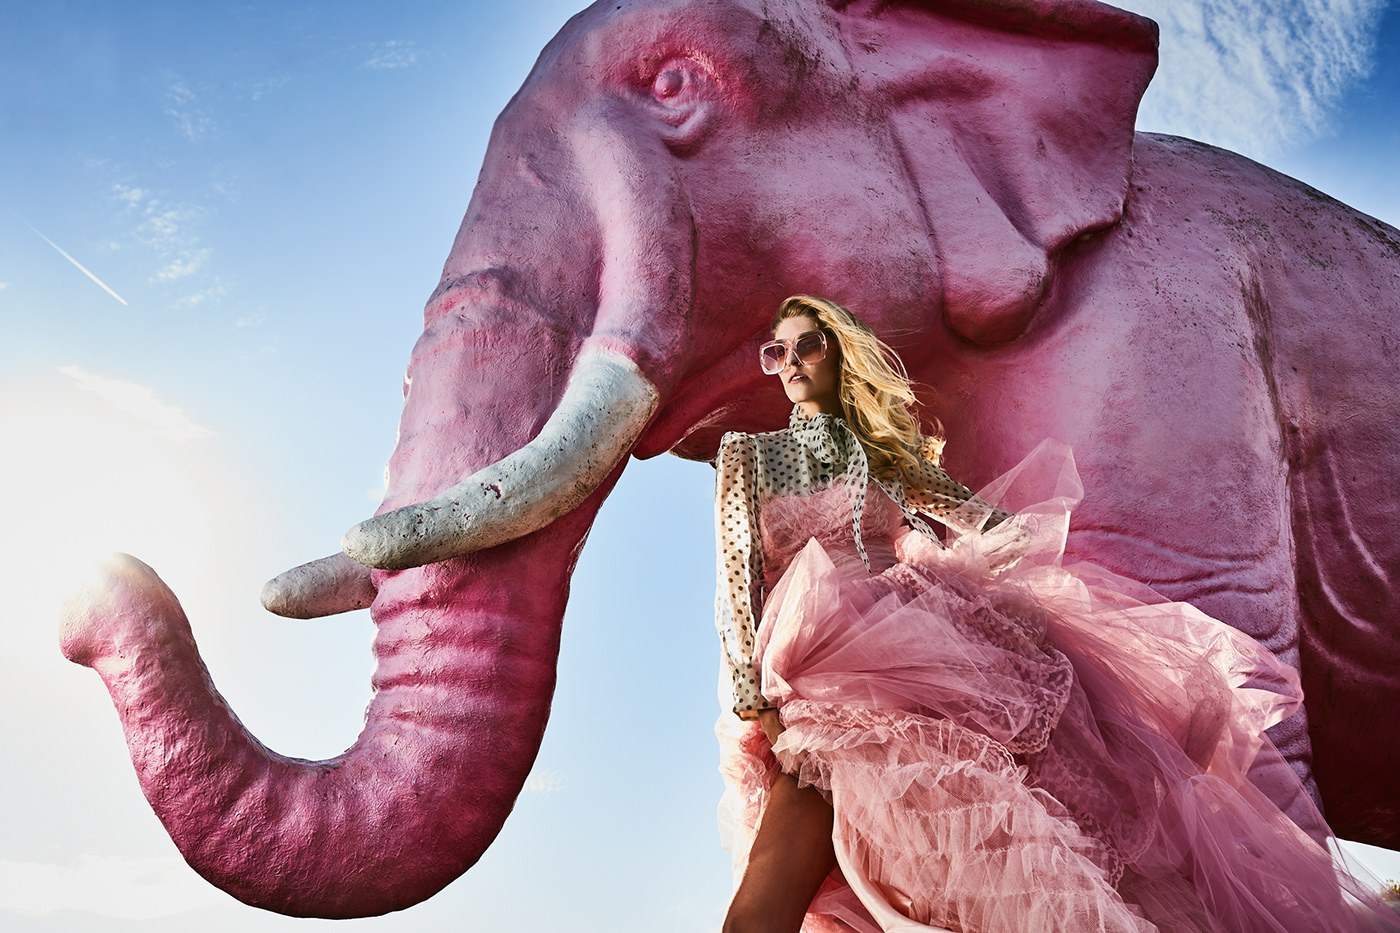 Fashion editorial by Brian Cummings, shot at a roadside attraction along route 66